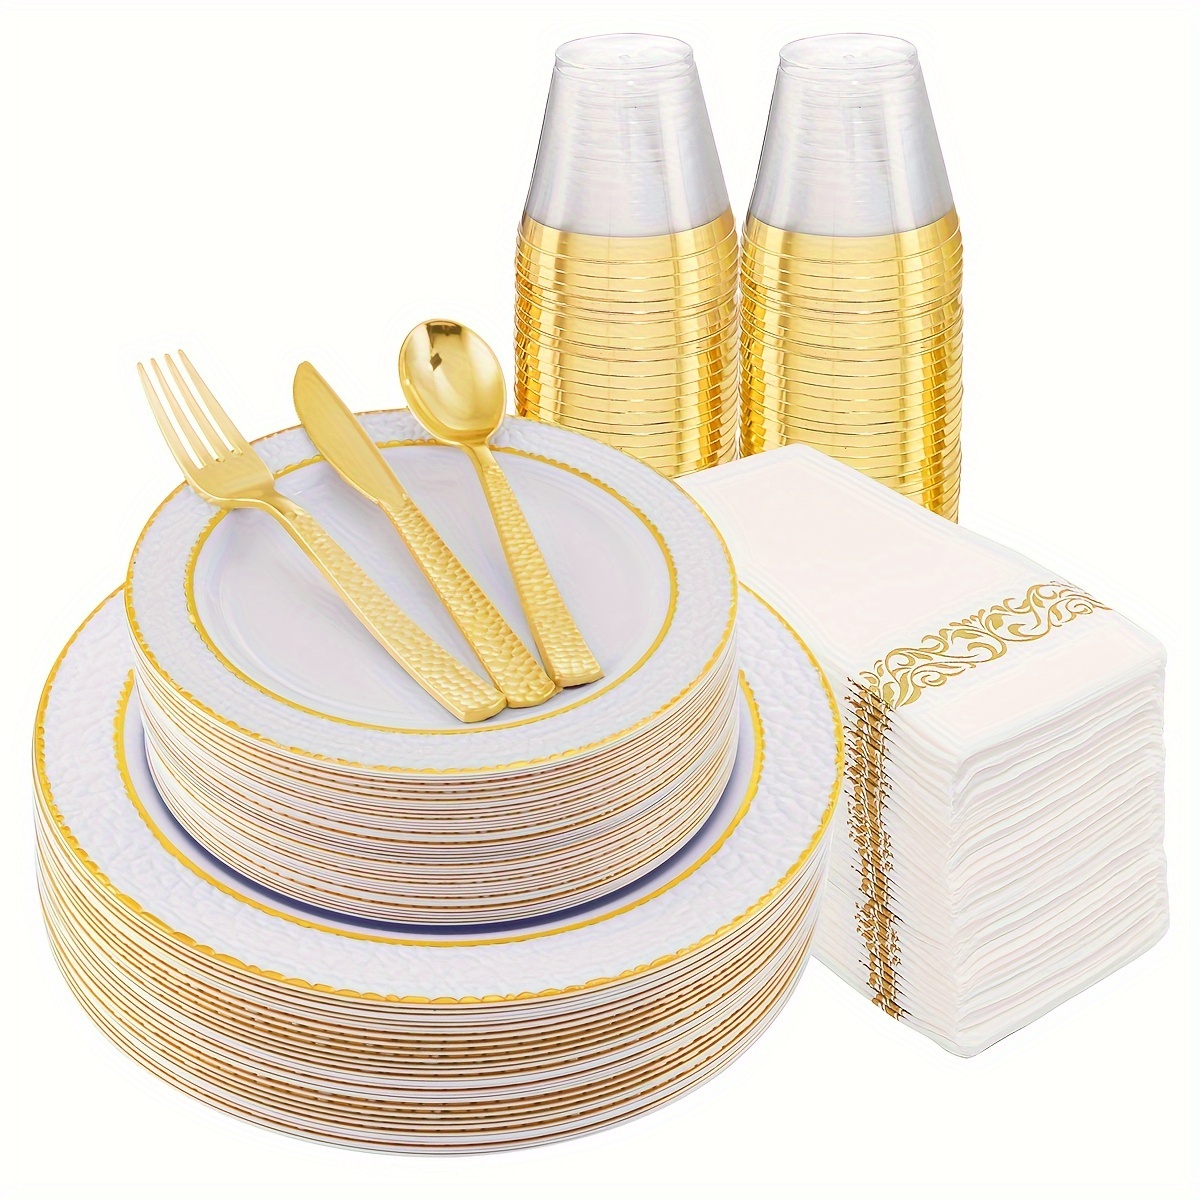 

175pcs Gold Plastic Plates & White And Gold Plastic Dinnerware-include 50plates, 25knives, 25spoons, 25forks, 25cups, 25napkins - Disposable Plates Ideal For Wedding, Easter Party